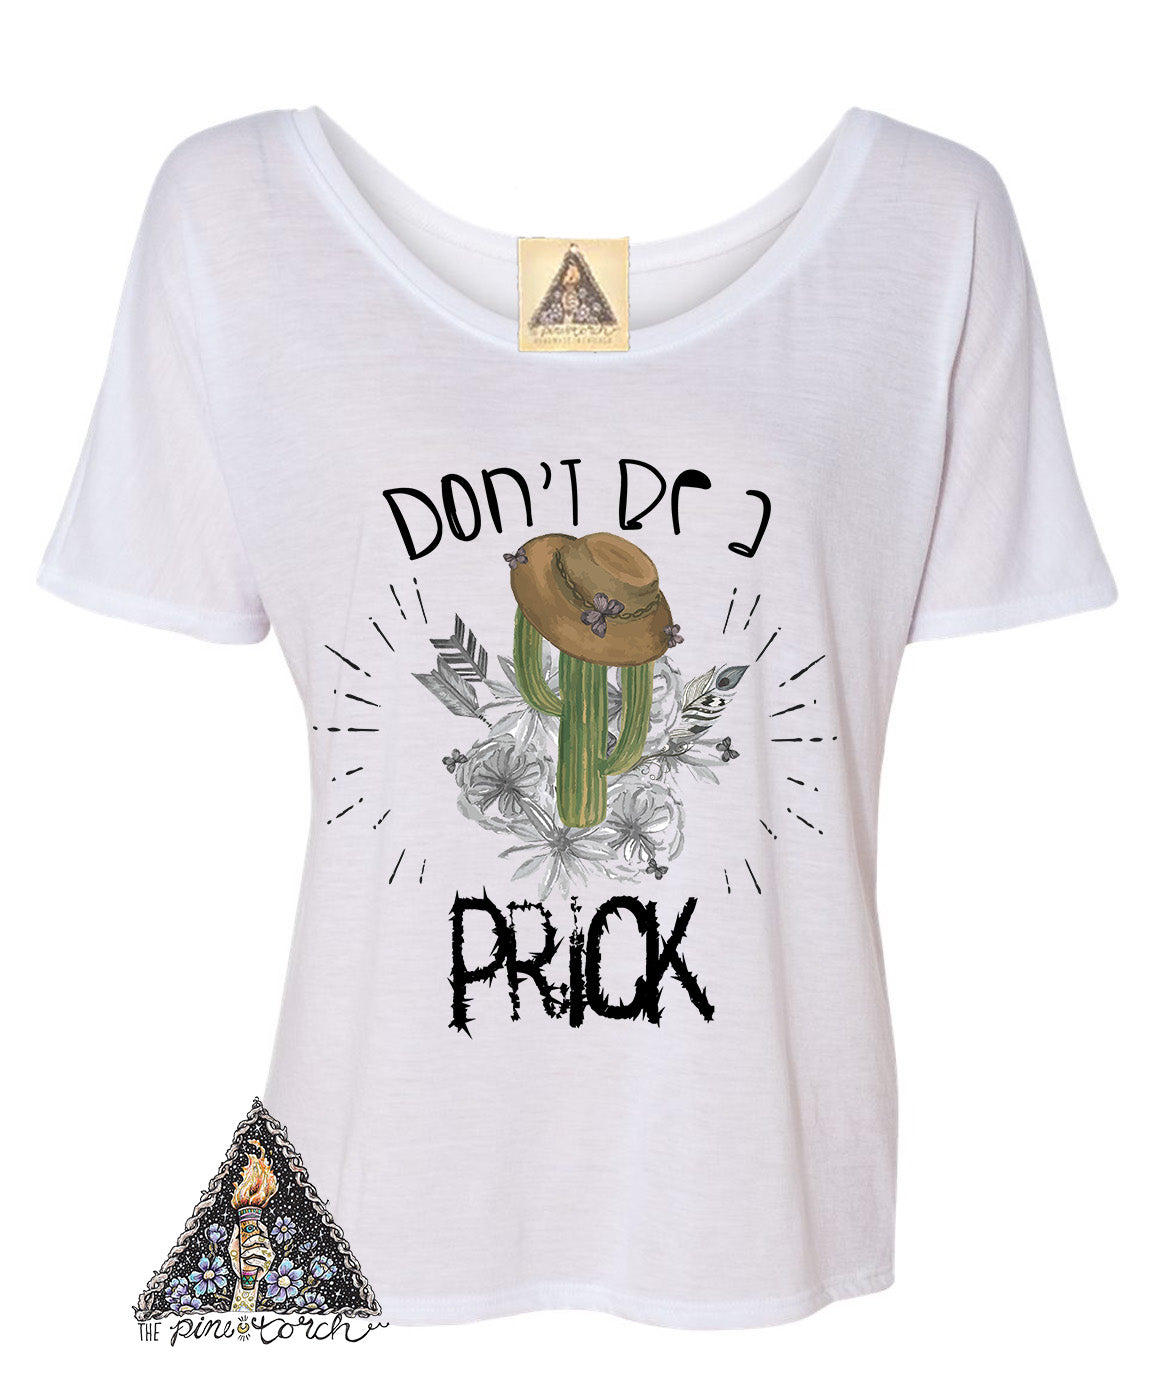 « DON'T BE A PRICK » WOMEN'S SLOUCHY OR UNISEX TEE